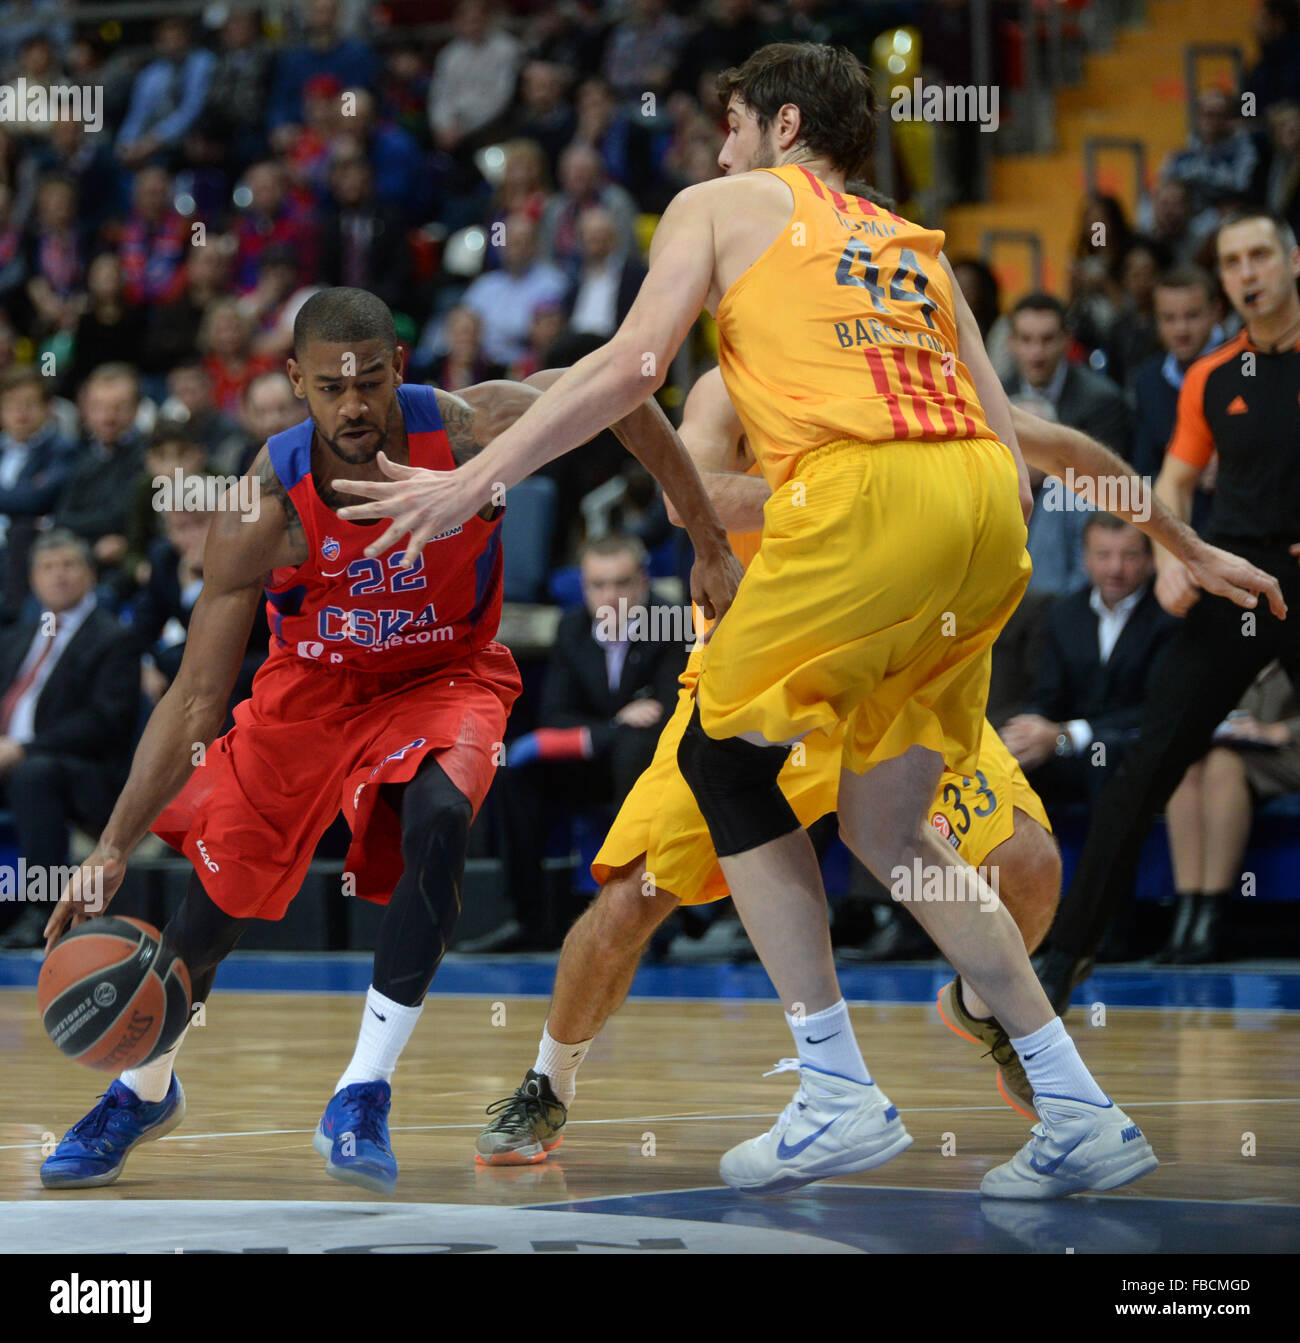 Moscow, Russia. 14th Jan, 2016. Cory Higgins (L) of CSKA Moscow drives the ball during the Basketball Euroleague Top 16 match against Barcelona in Moscow, Russia, Jan. 14, 2016. CSKA Moscow won 93-82. © Pavel Bednyakov/Xinhua/Alamy Live News Stock Photo